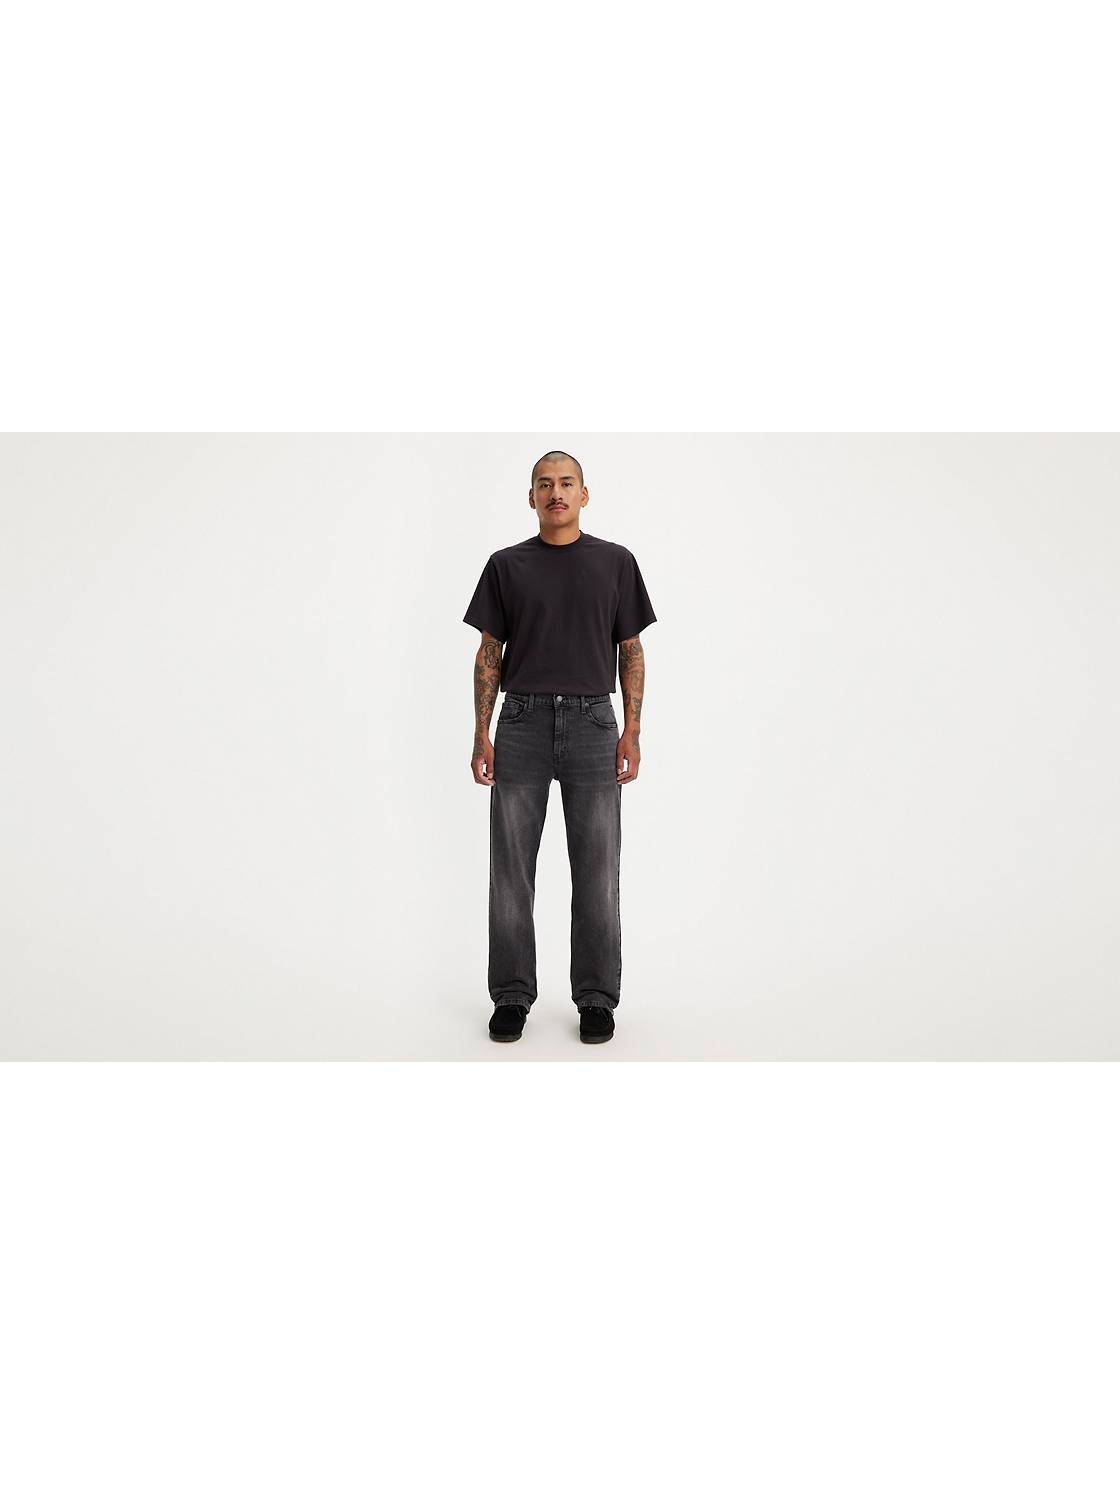 Men's Loose Fit Relaxed Jeans Online-LINDBERGH - LINDBERGH